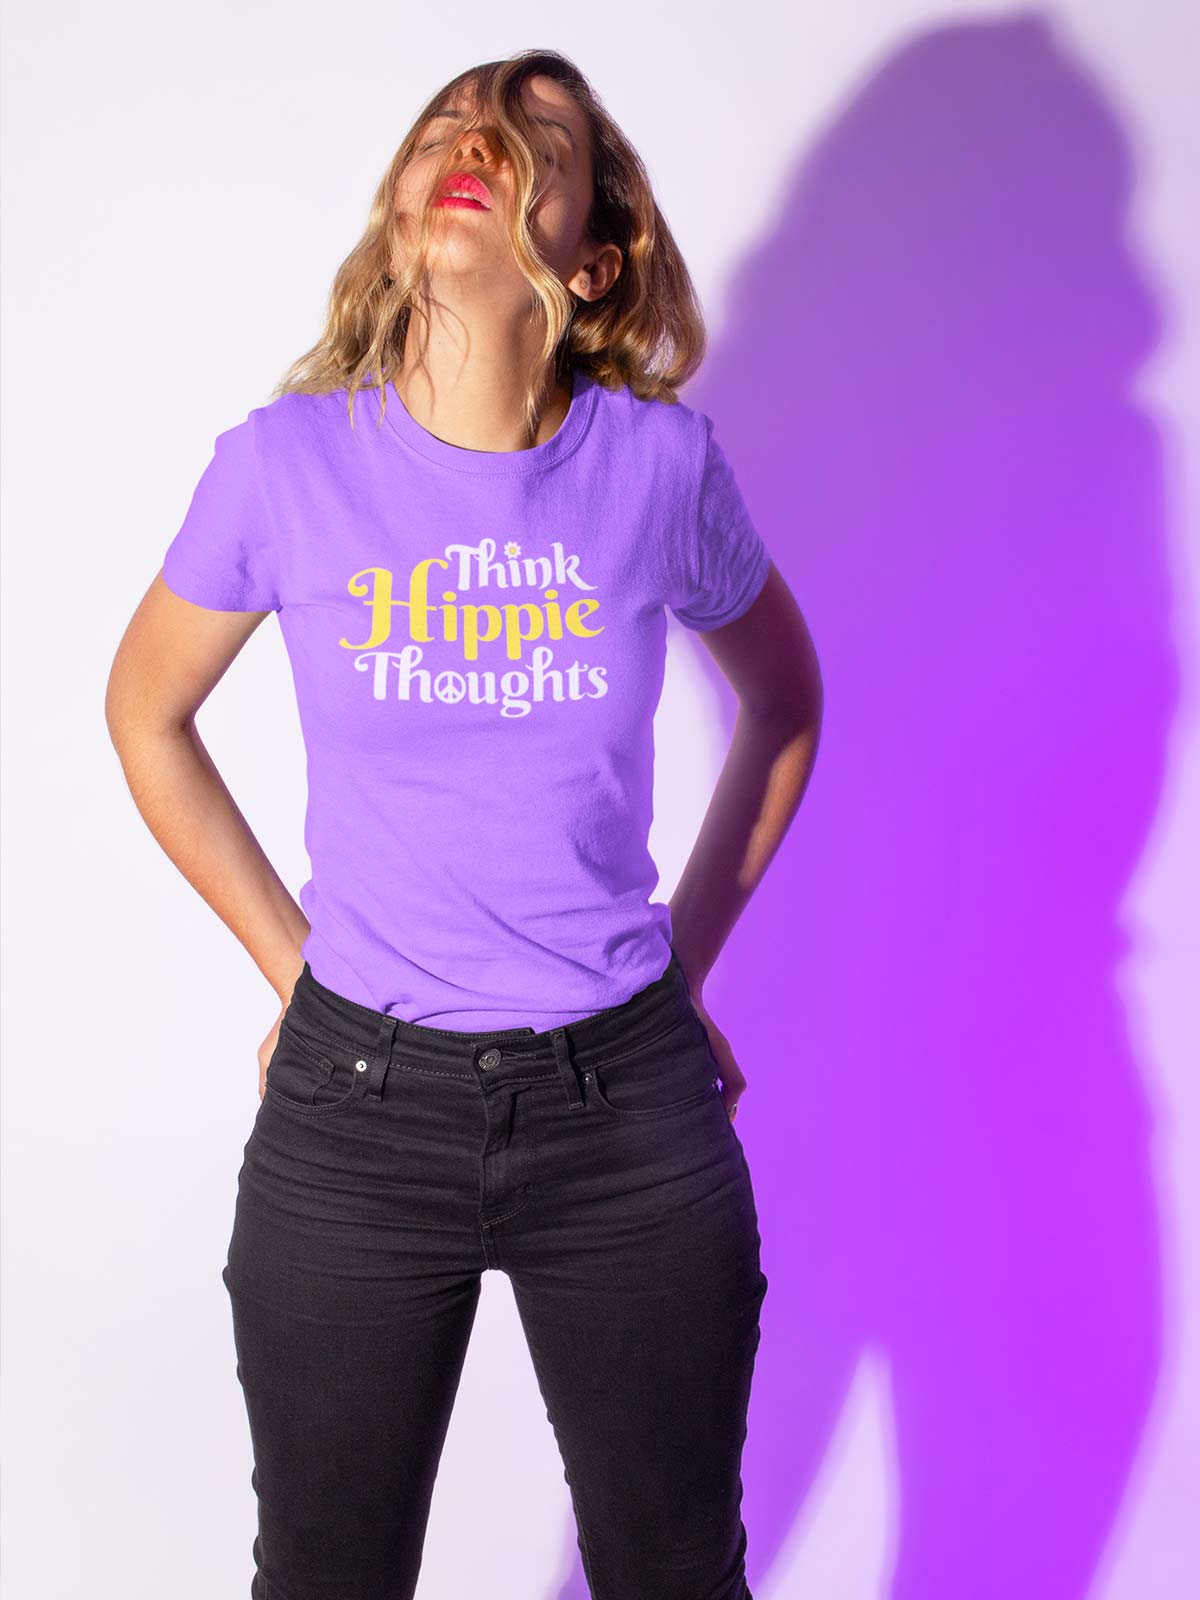 Think-hippie-thoughts-printed-t-shirt-for-women by Ghumakkad